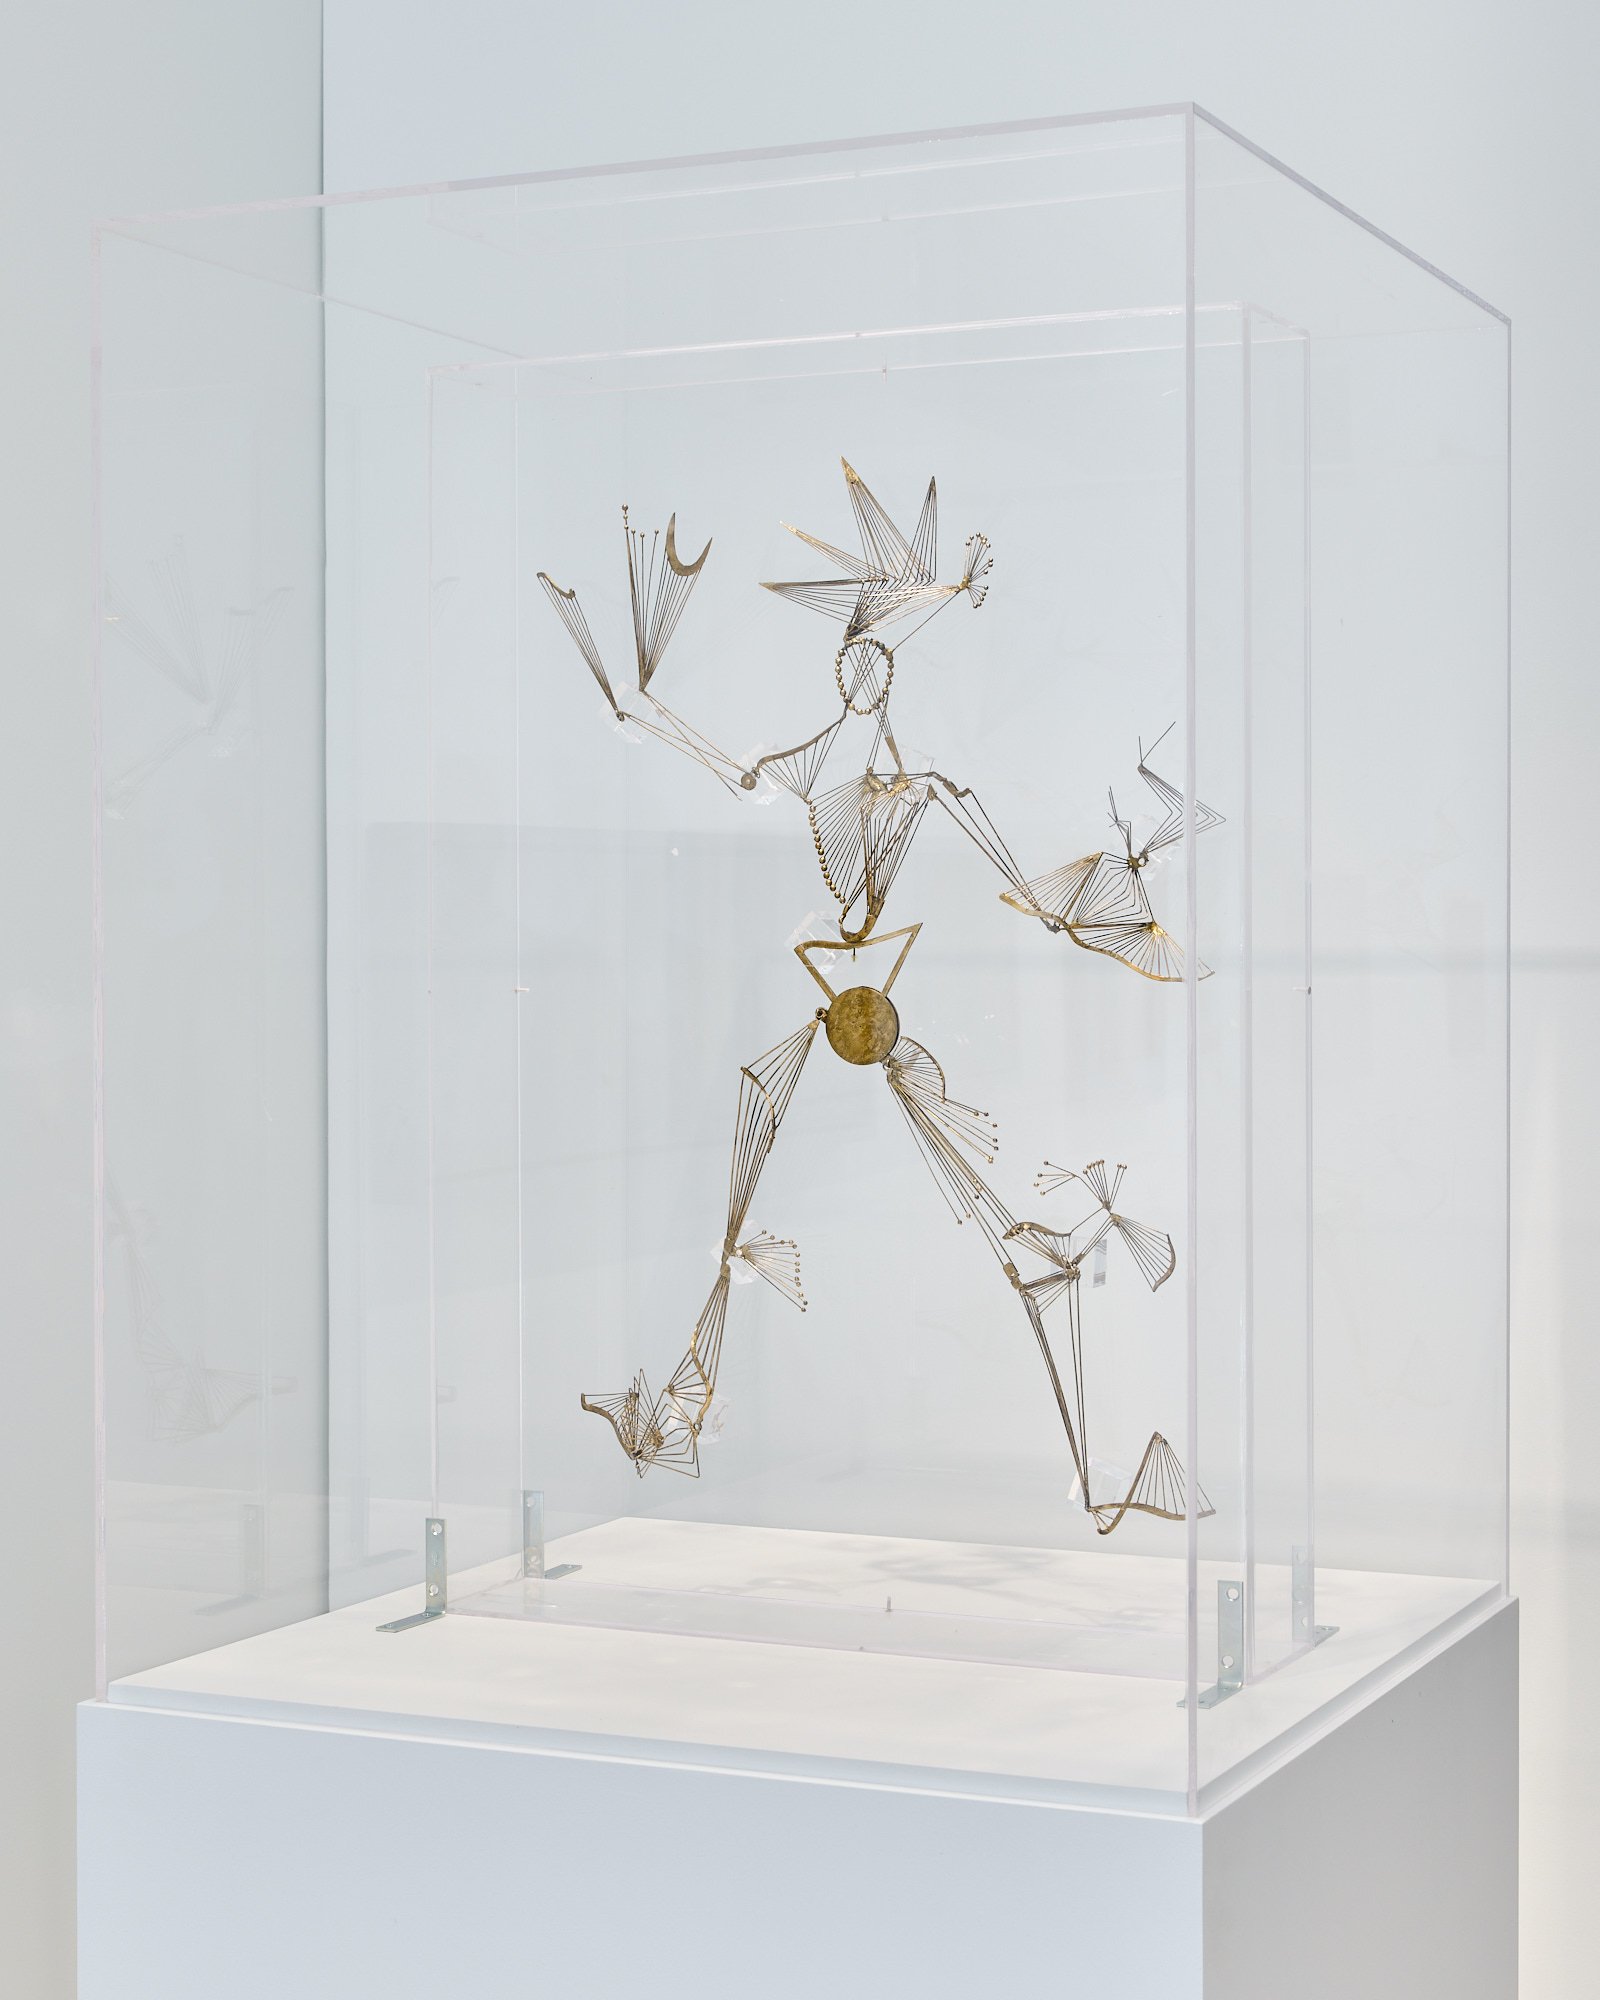  Alice Rahon,  Juggler , 1946, wire marionette, 27 x 19 1/4 x 3 inches (69 x 49 x 8) 